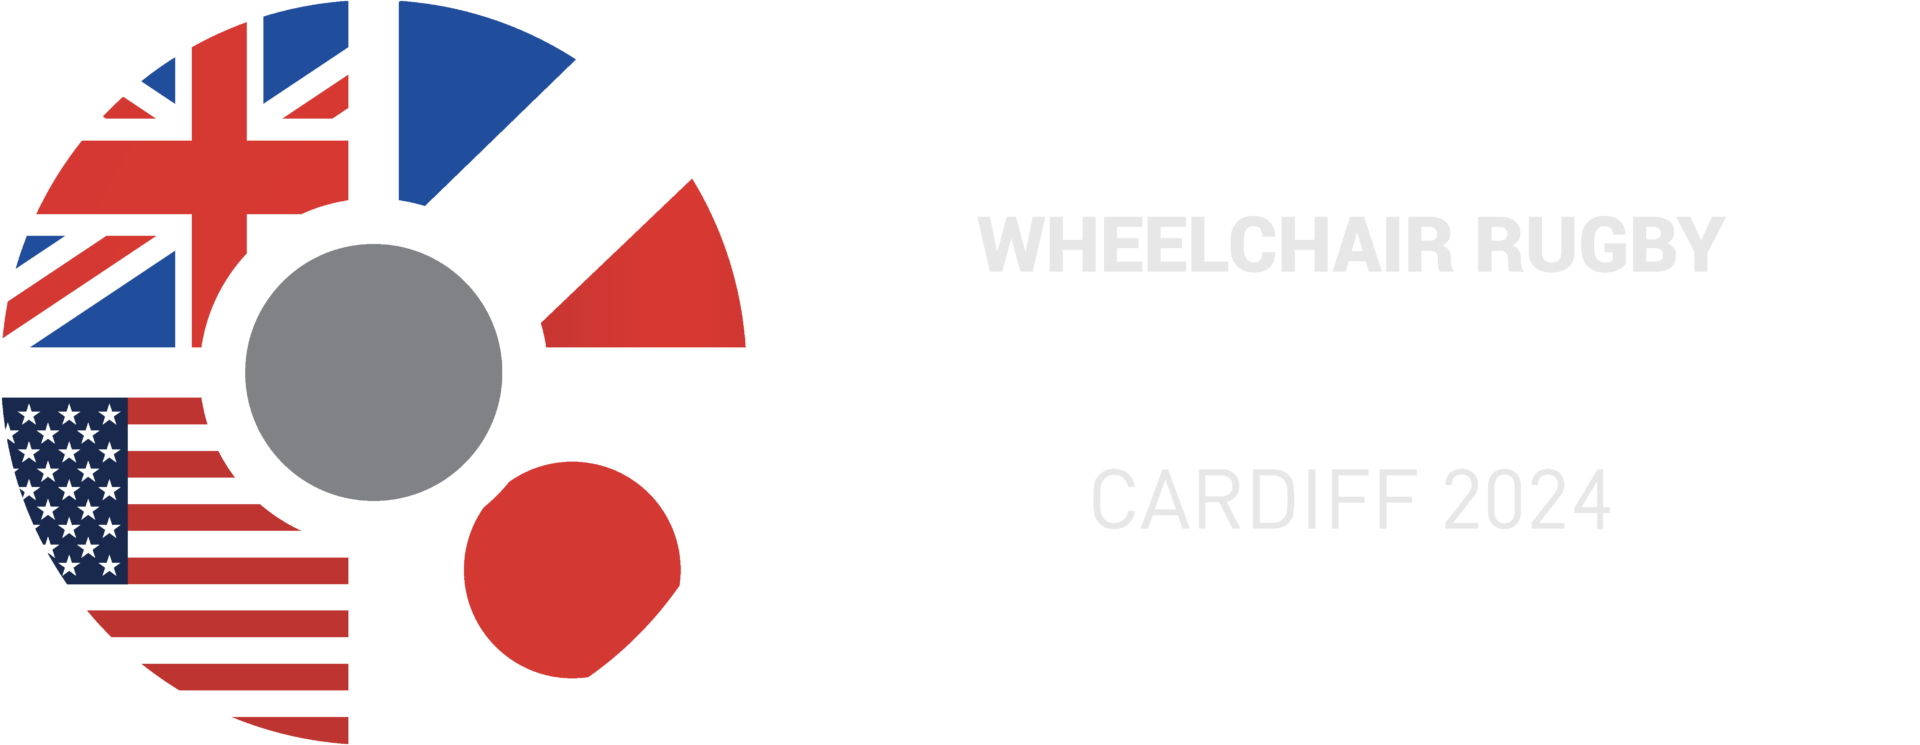 Wheelchair Rugby Quad Nations